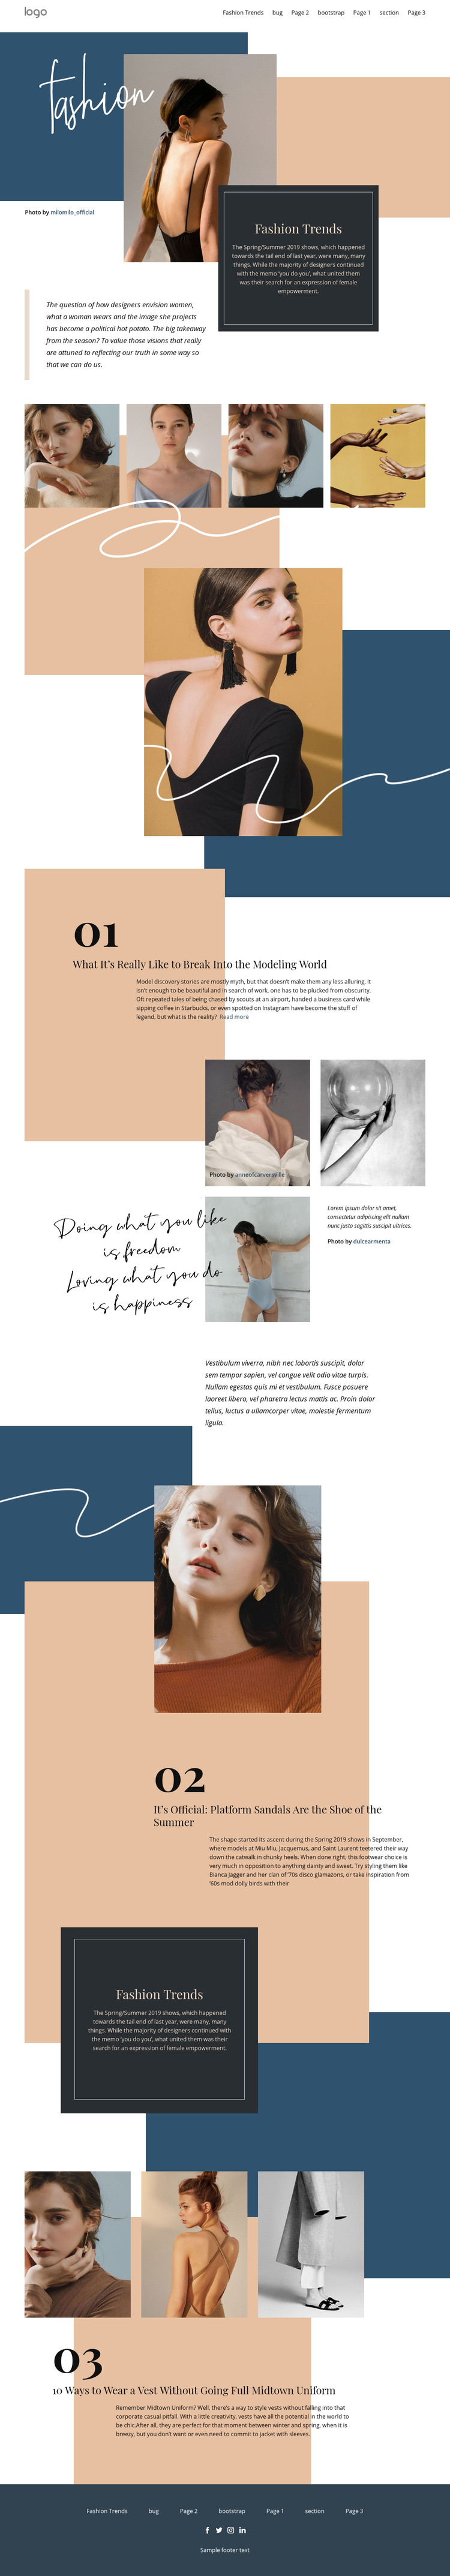 Innovative trends in fashion  Homepage Design